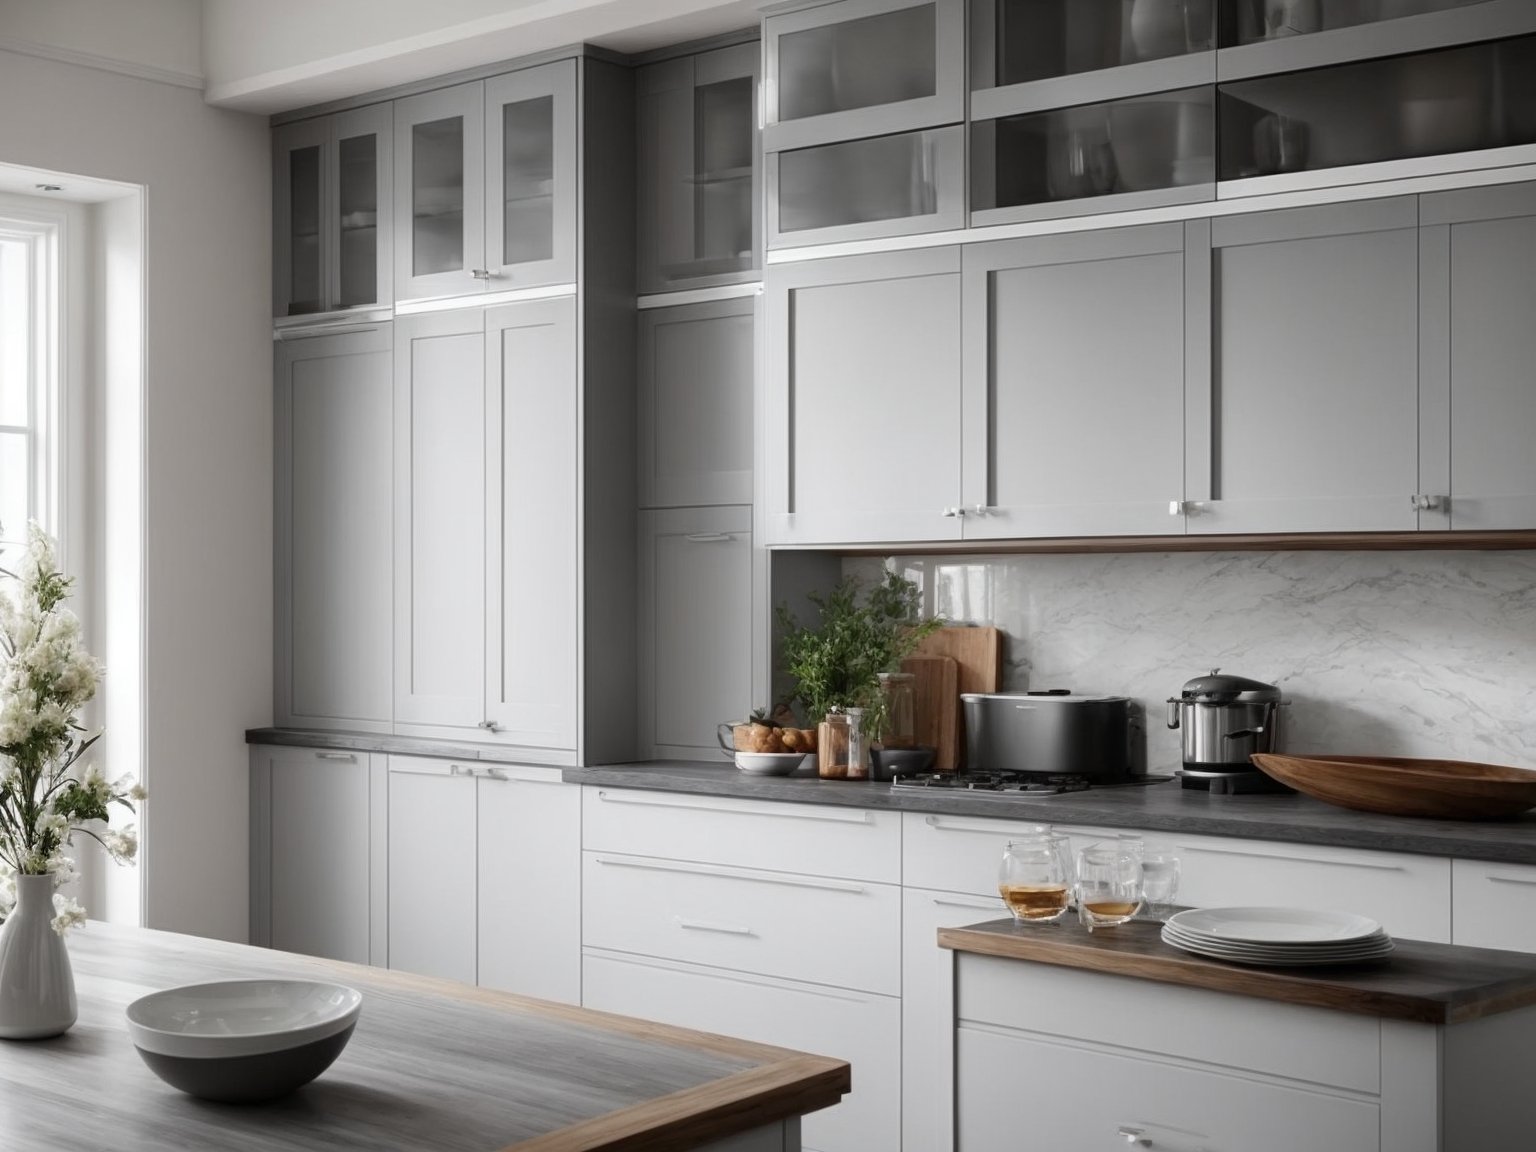 Two-tone grey and white kitchen cabinets, adding a touch of elegance to the space.